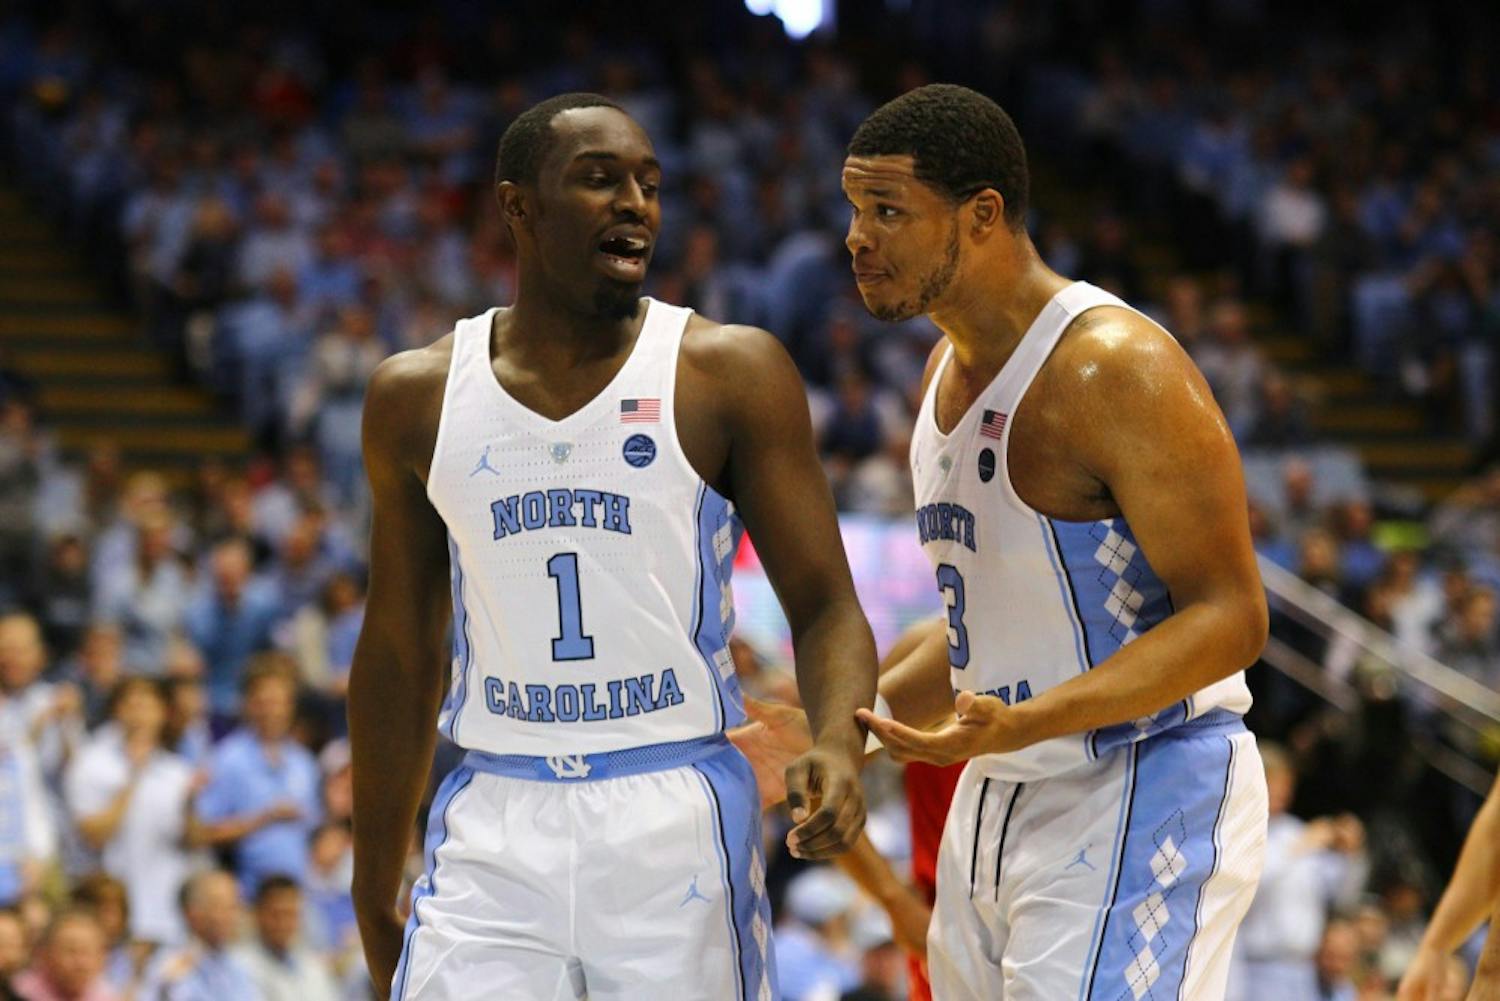 Junior forward Theo Pinson (1) strategizes with senior forward Kennedy Meeks (3) during the game against N.C. State.